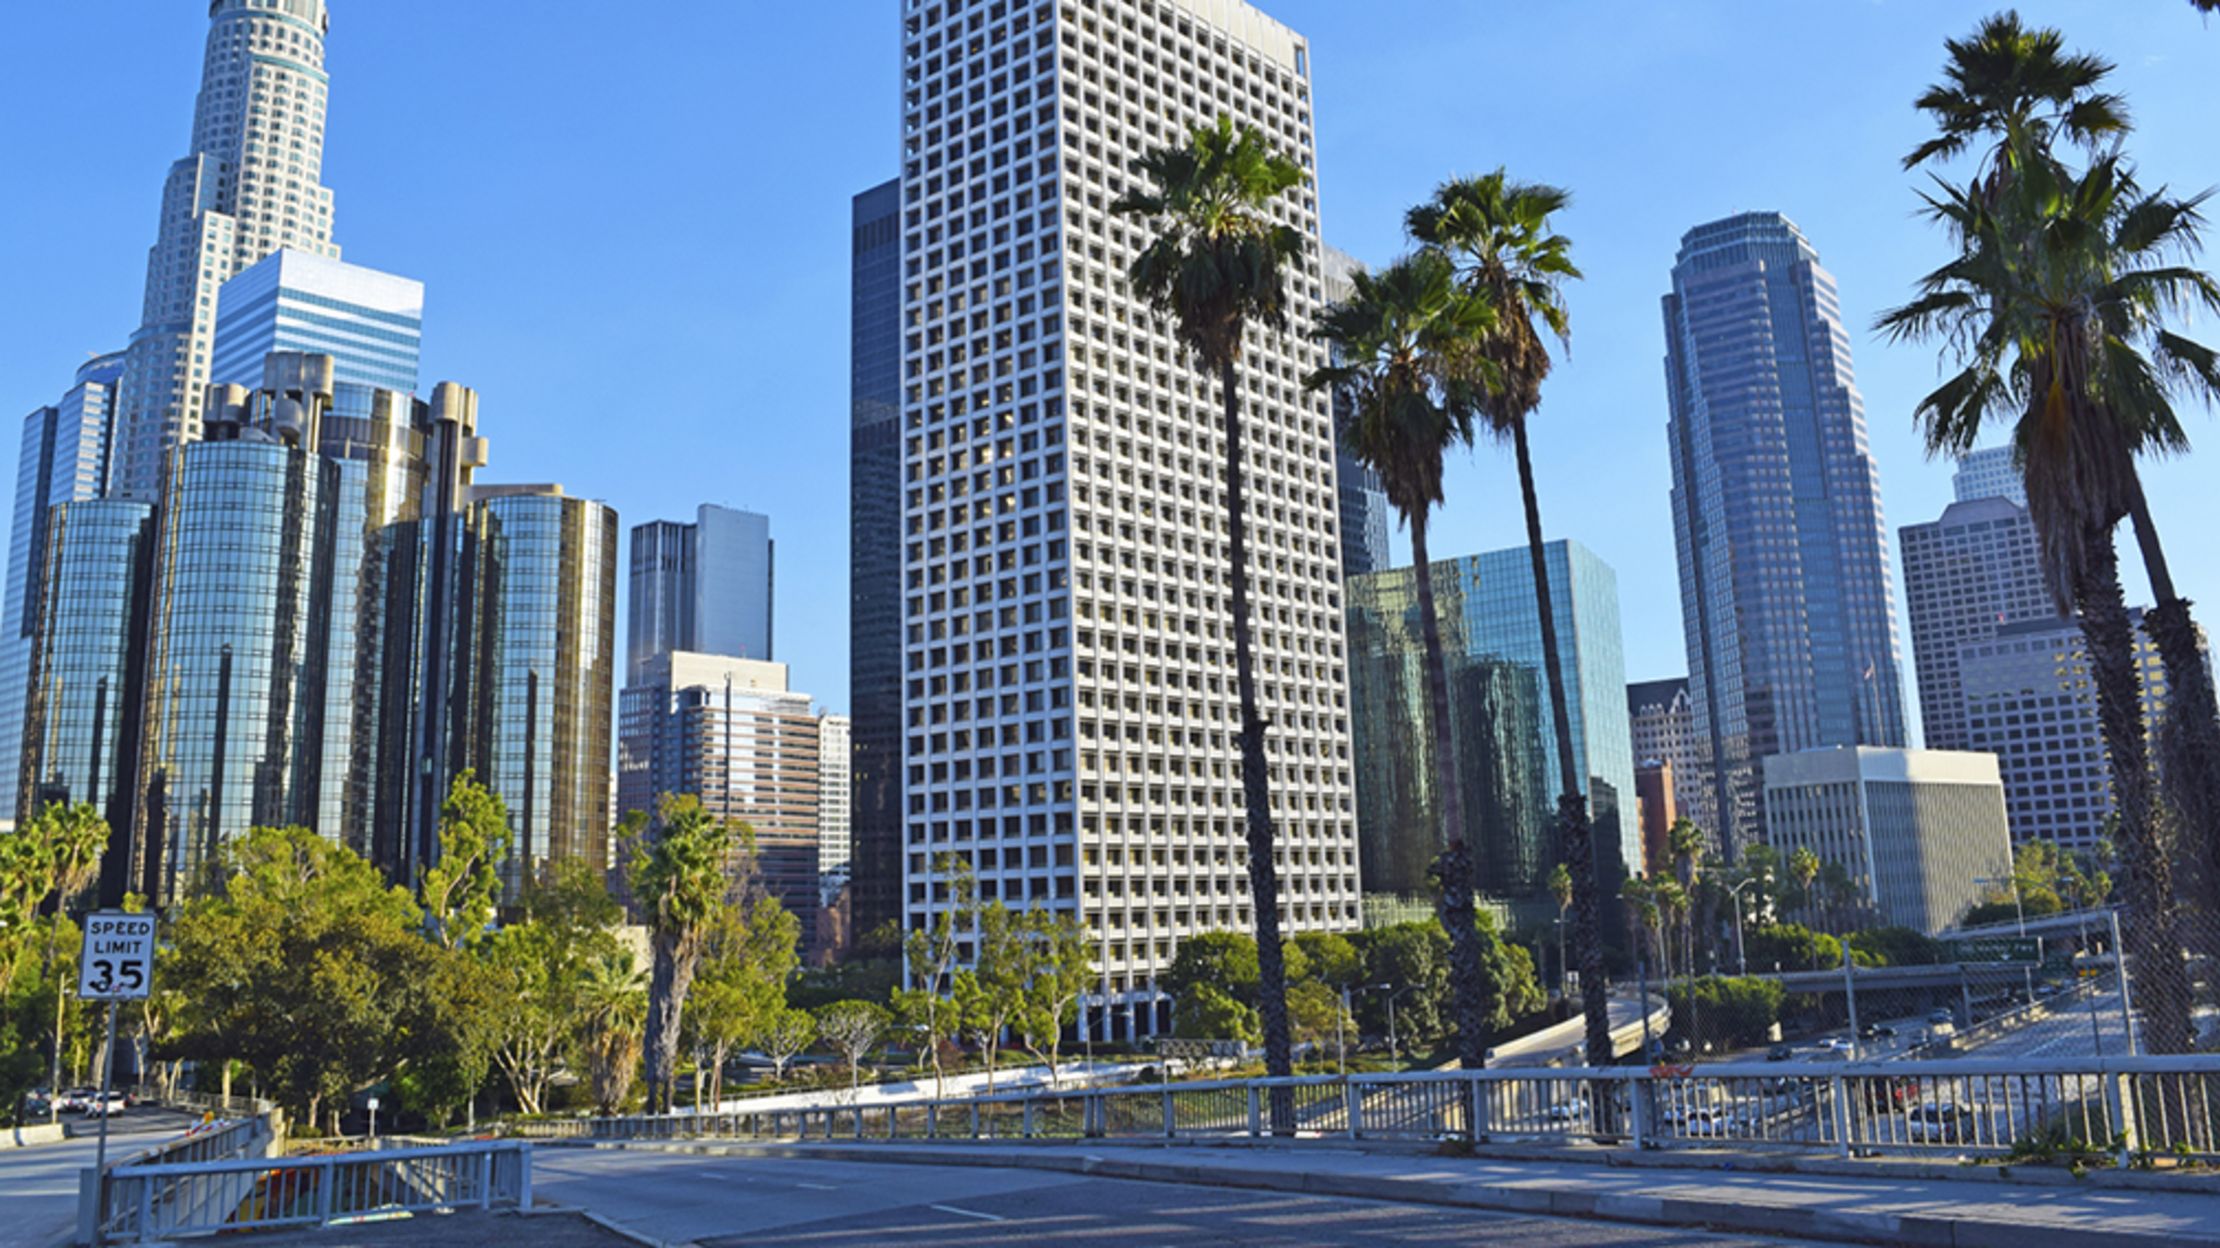 Top 10 non touristy things to do in Los Angeles